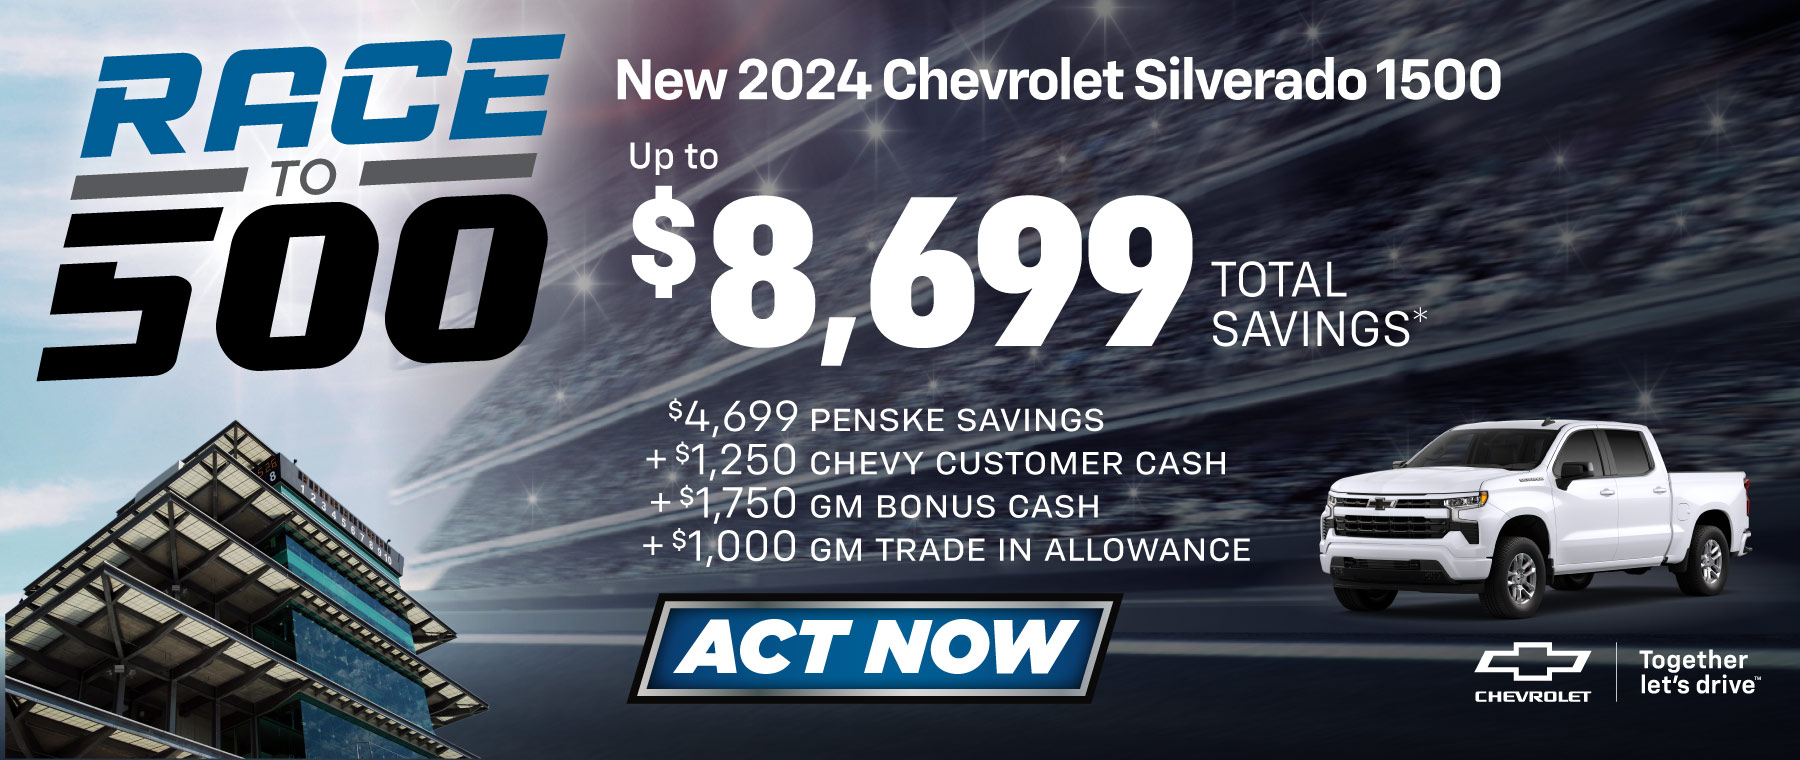 New 2024 Chevrolet Silverado 1500 Crew Cab up to $7,342 Total Cash Allowance* or 2.9% APR for 72 Months** – Shop Now